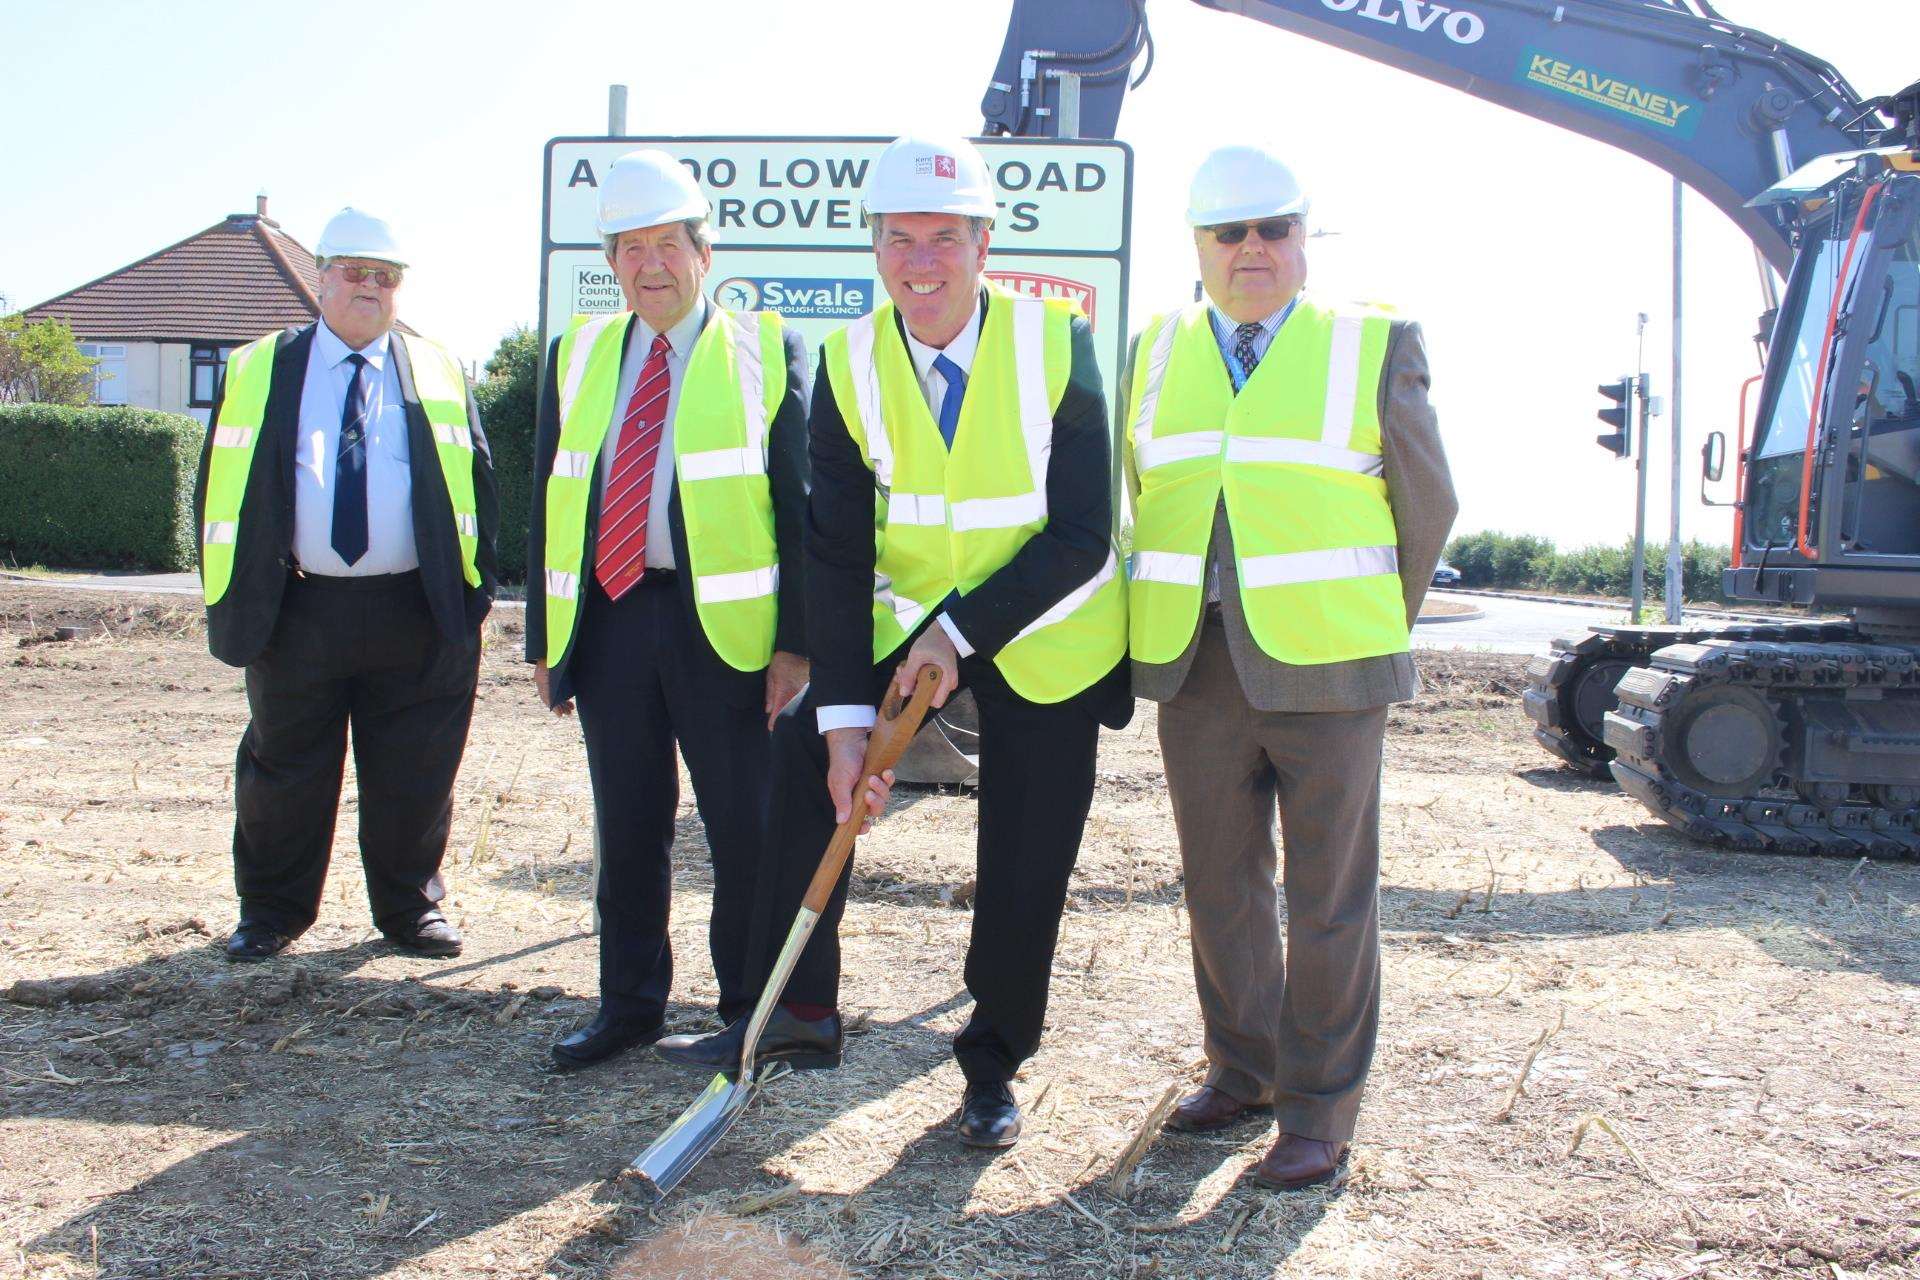 Minster parish council chairman Ken Ingleton, MP Gordon Henderson, Kent Cllr Mike Whiting and leader of Swqale council Cllr Andrew Bowles starts work on the new roundabout at the junction of the Lower Road and Barton Hill Drive, Minster, Sheppey (2796545)